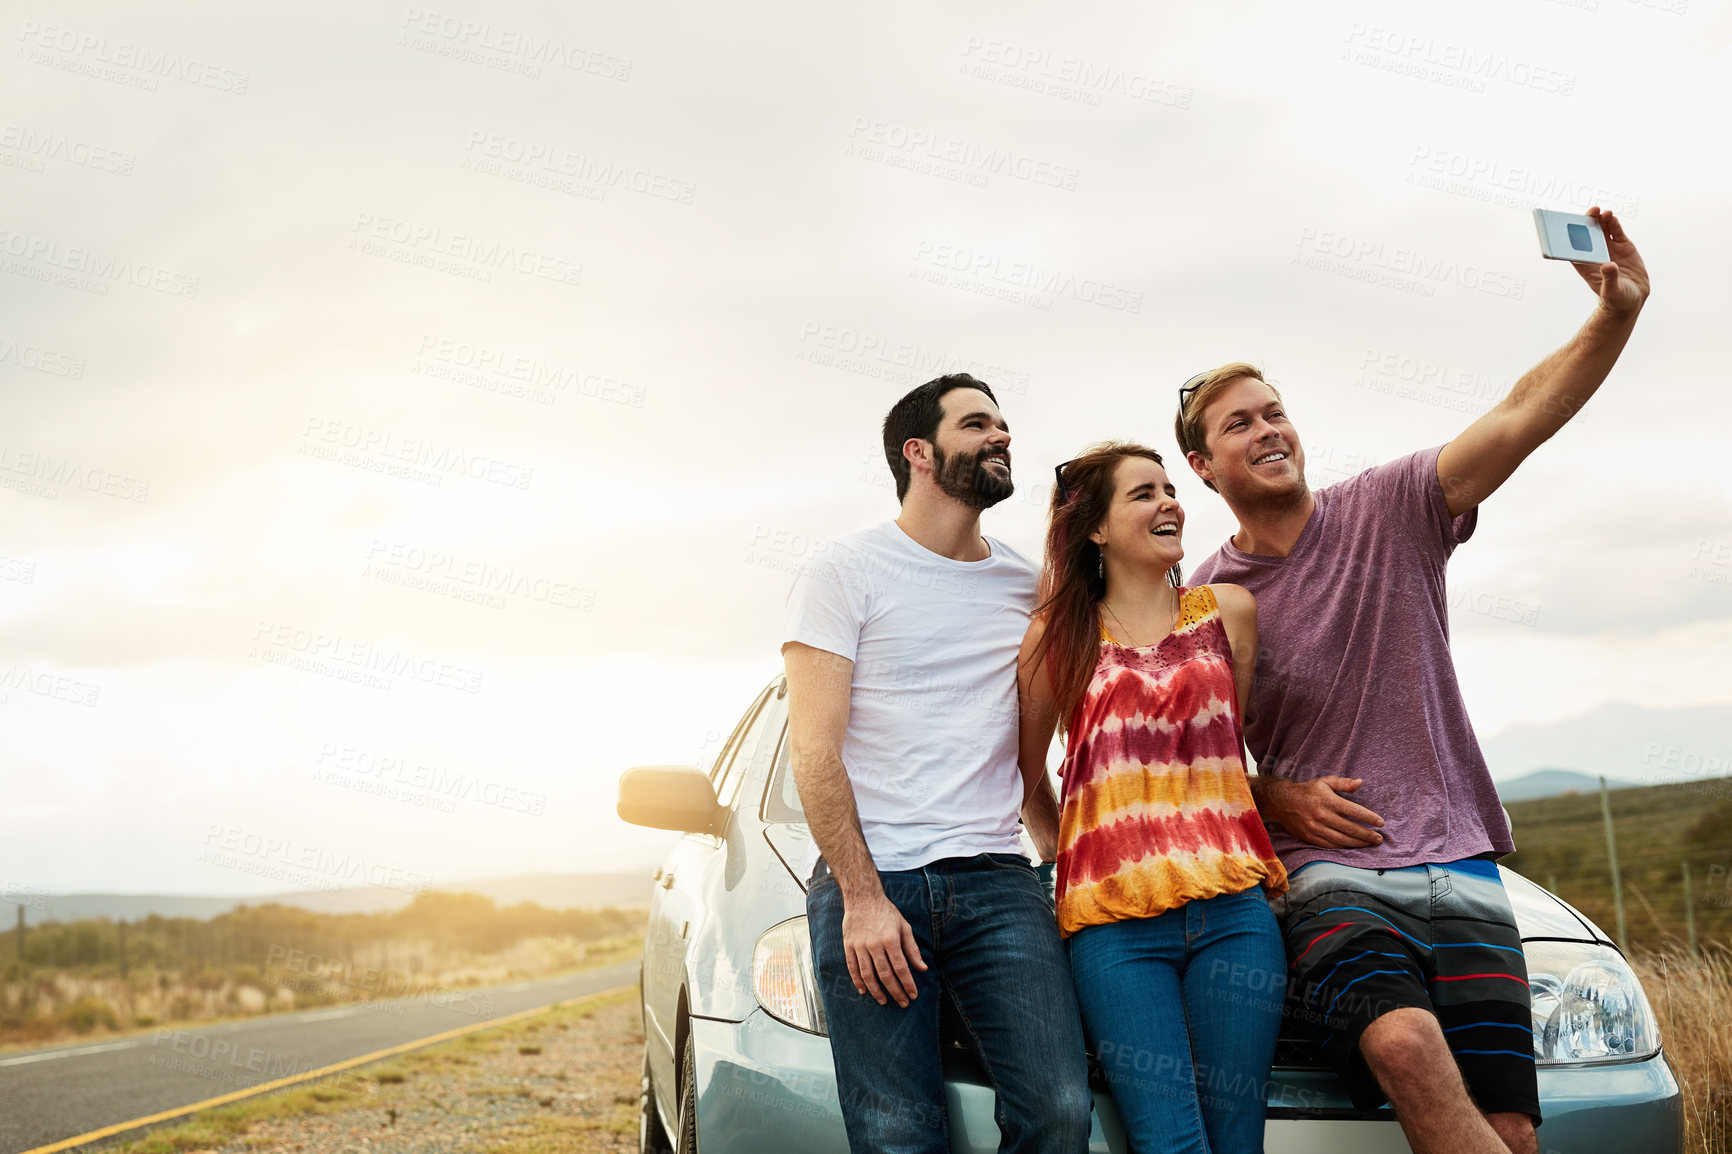 Buy stock photo Shot of a group young friends getting in close or a self portrait photo while standing next to a road